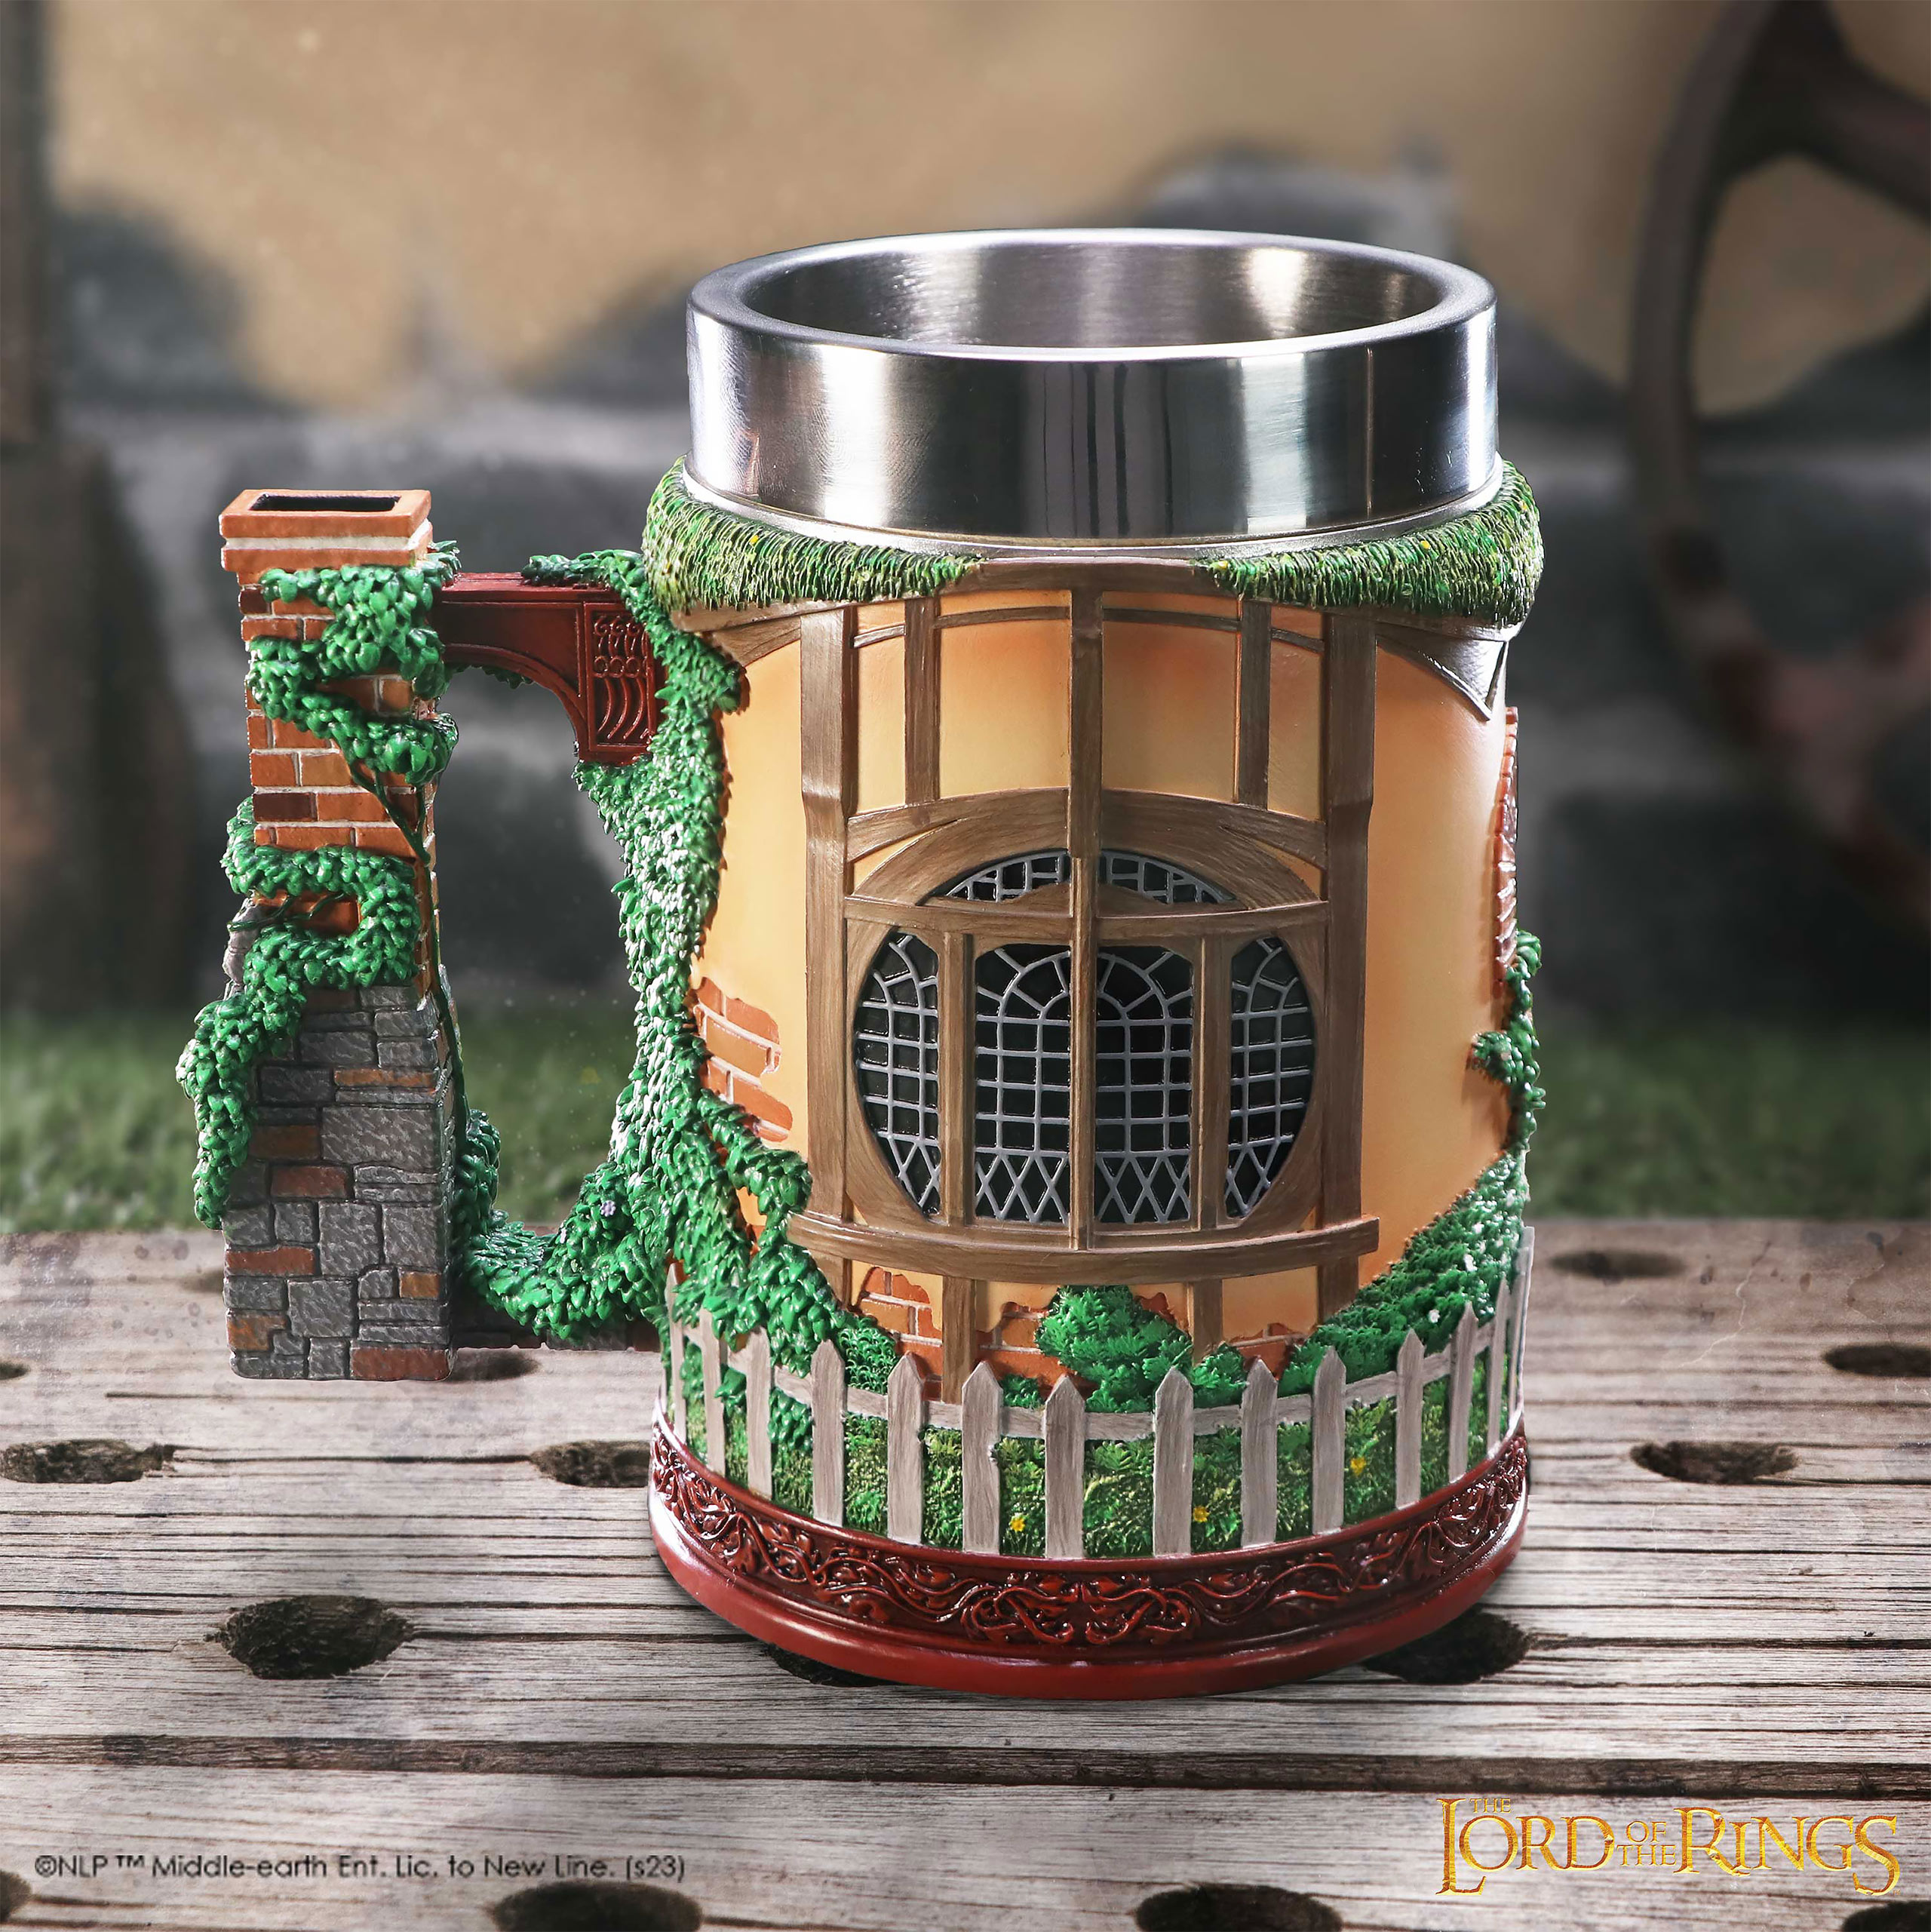 Lord of the Rings - Bag End Deluxe Mug